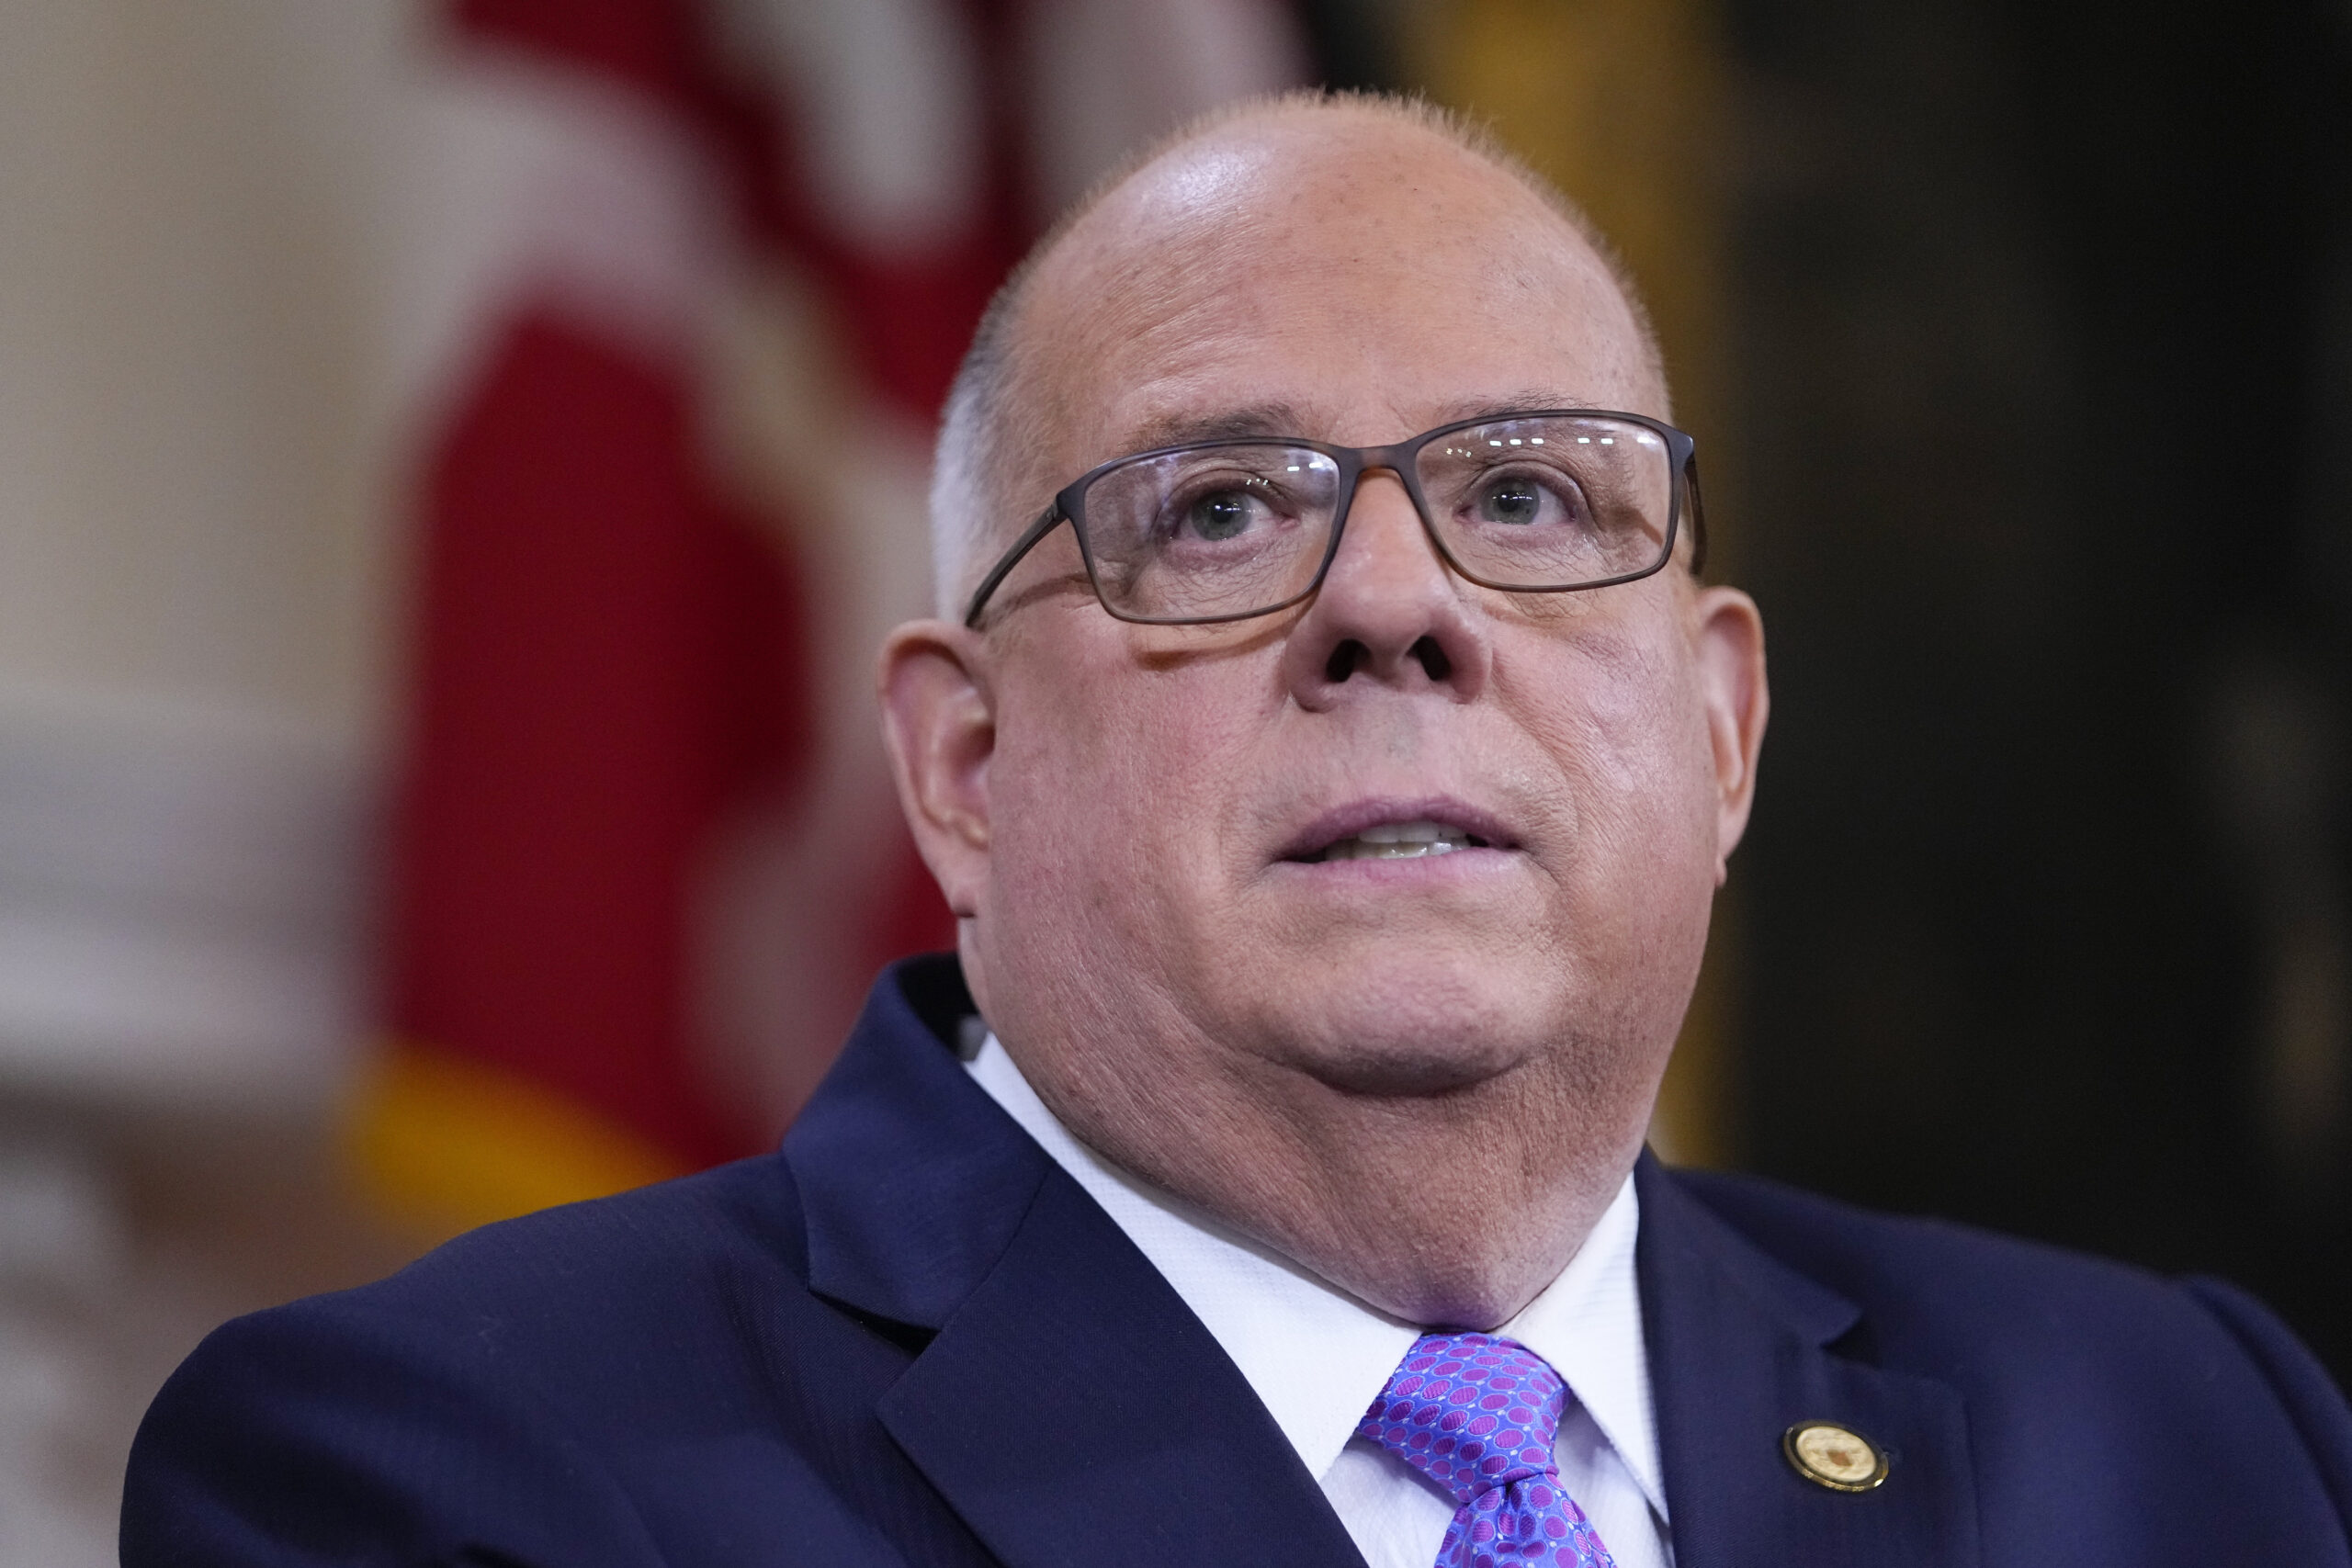 Larry Hogan steps down from No Labels leadership amid presidential speculation